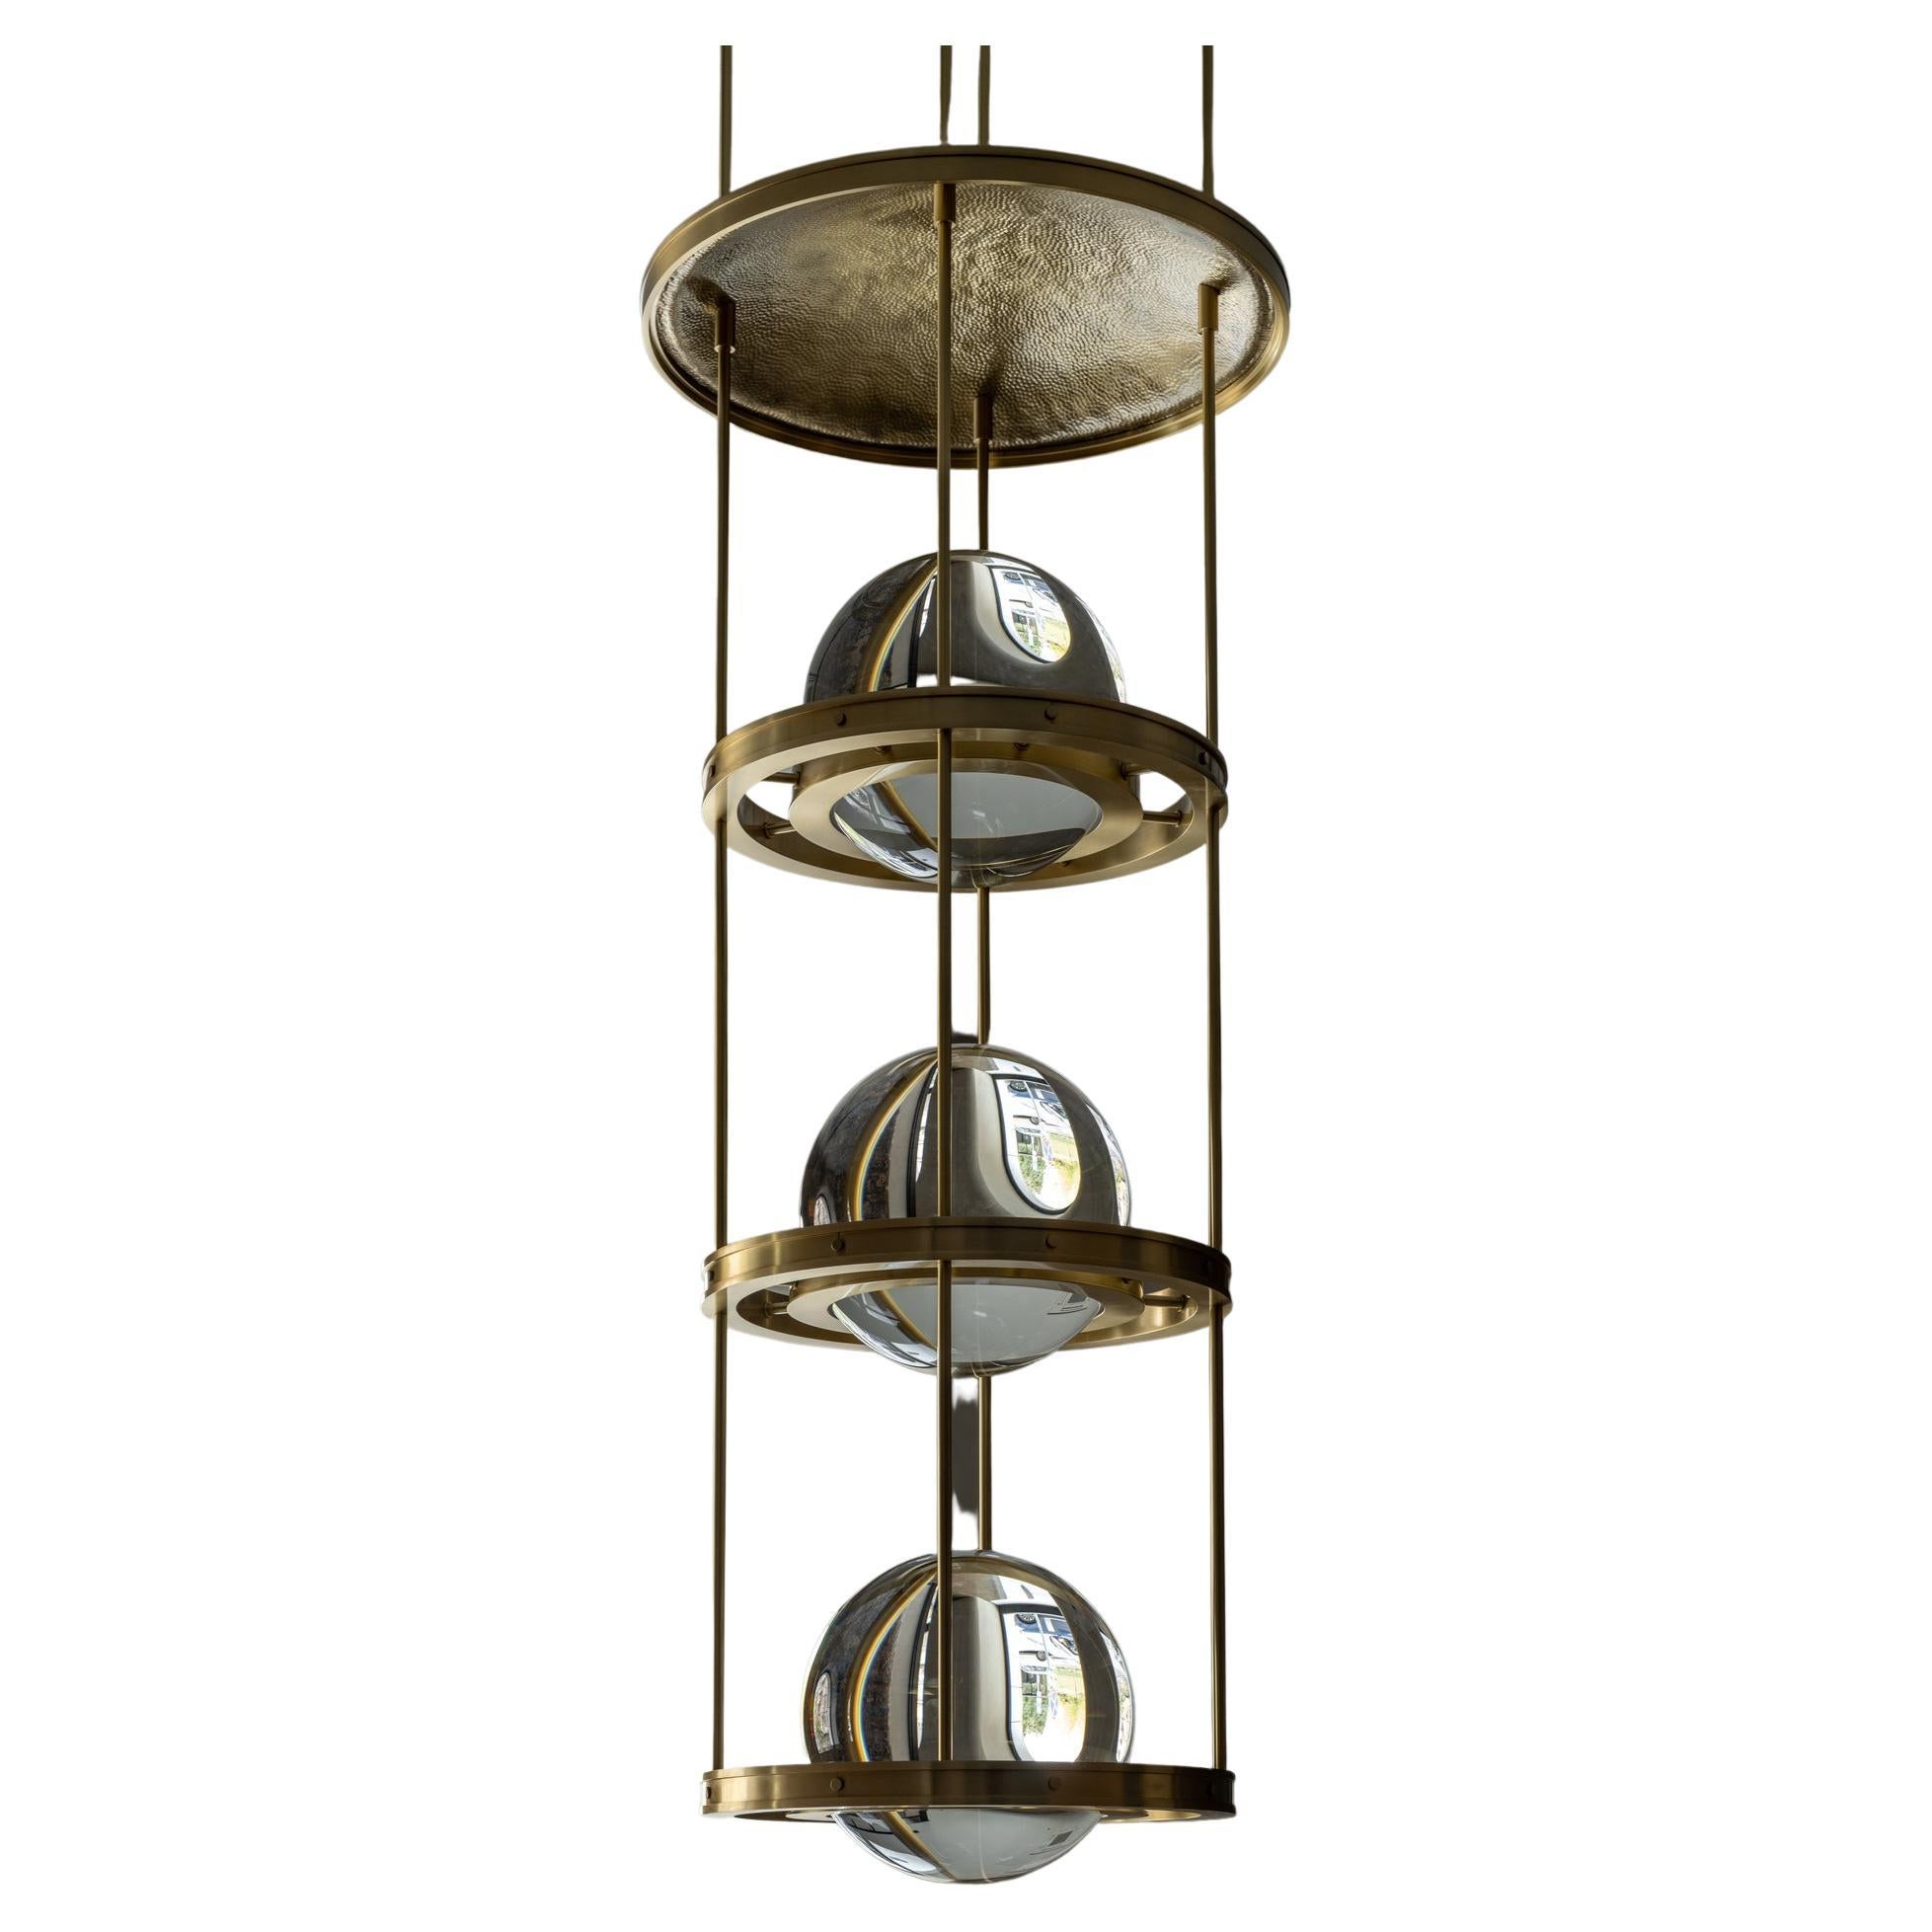 Miessa Small Vertical Chandelier for High-Ceiling Space with Art-Deco Vibe